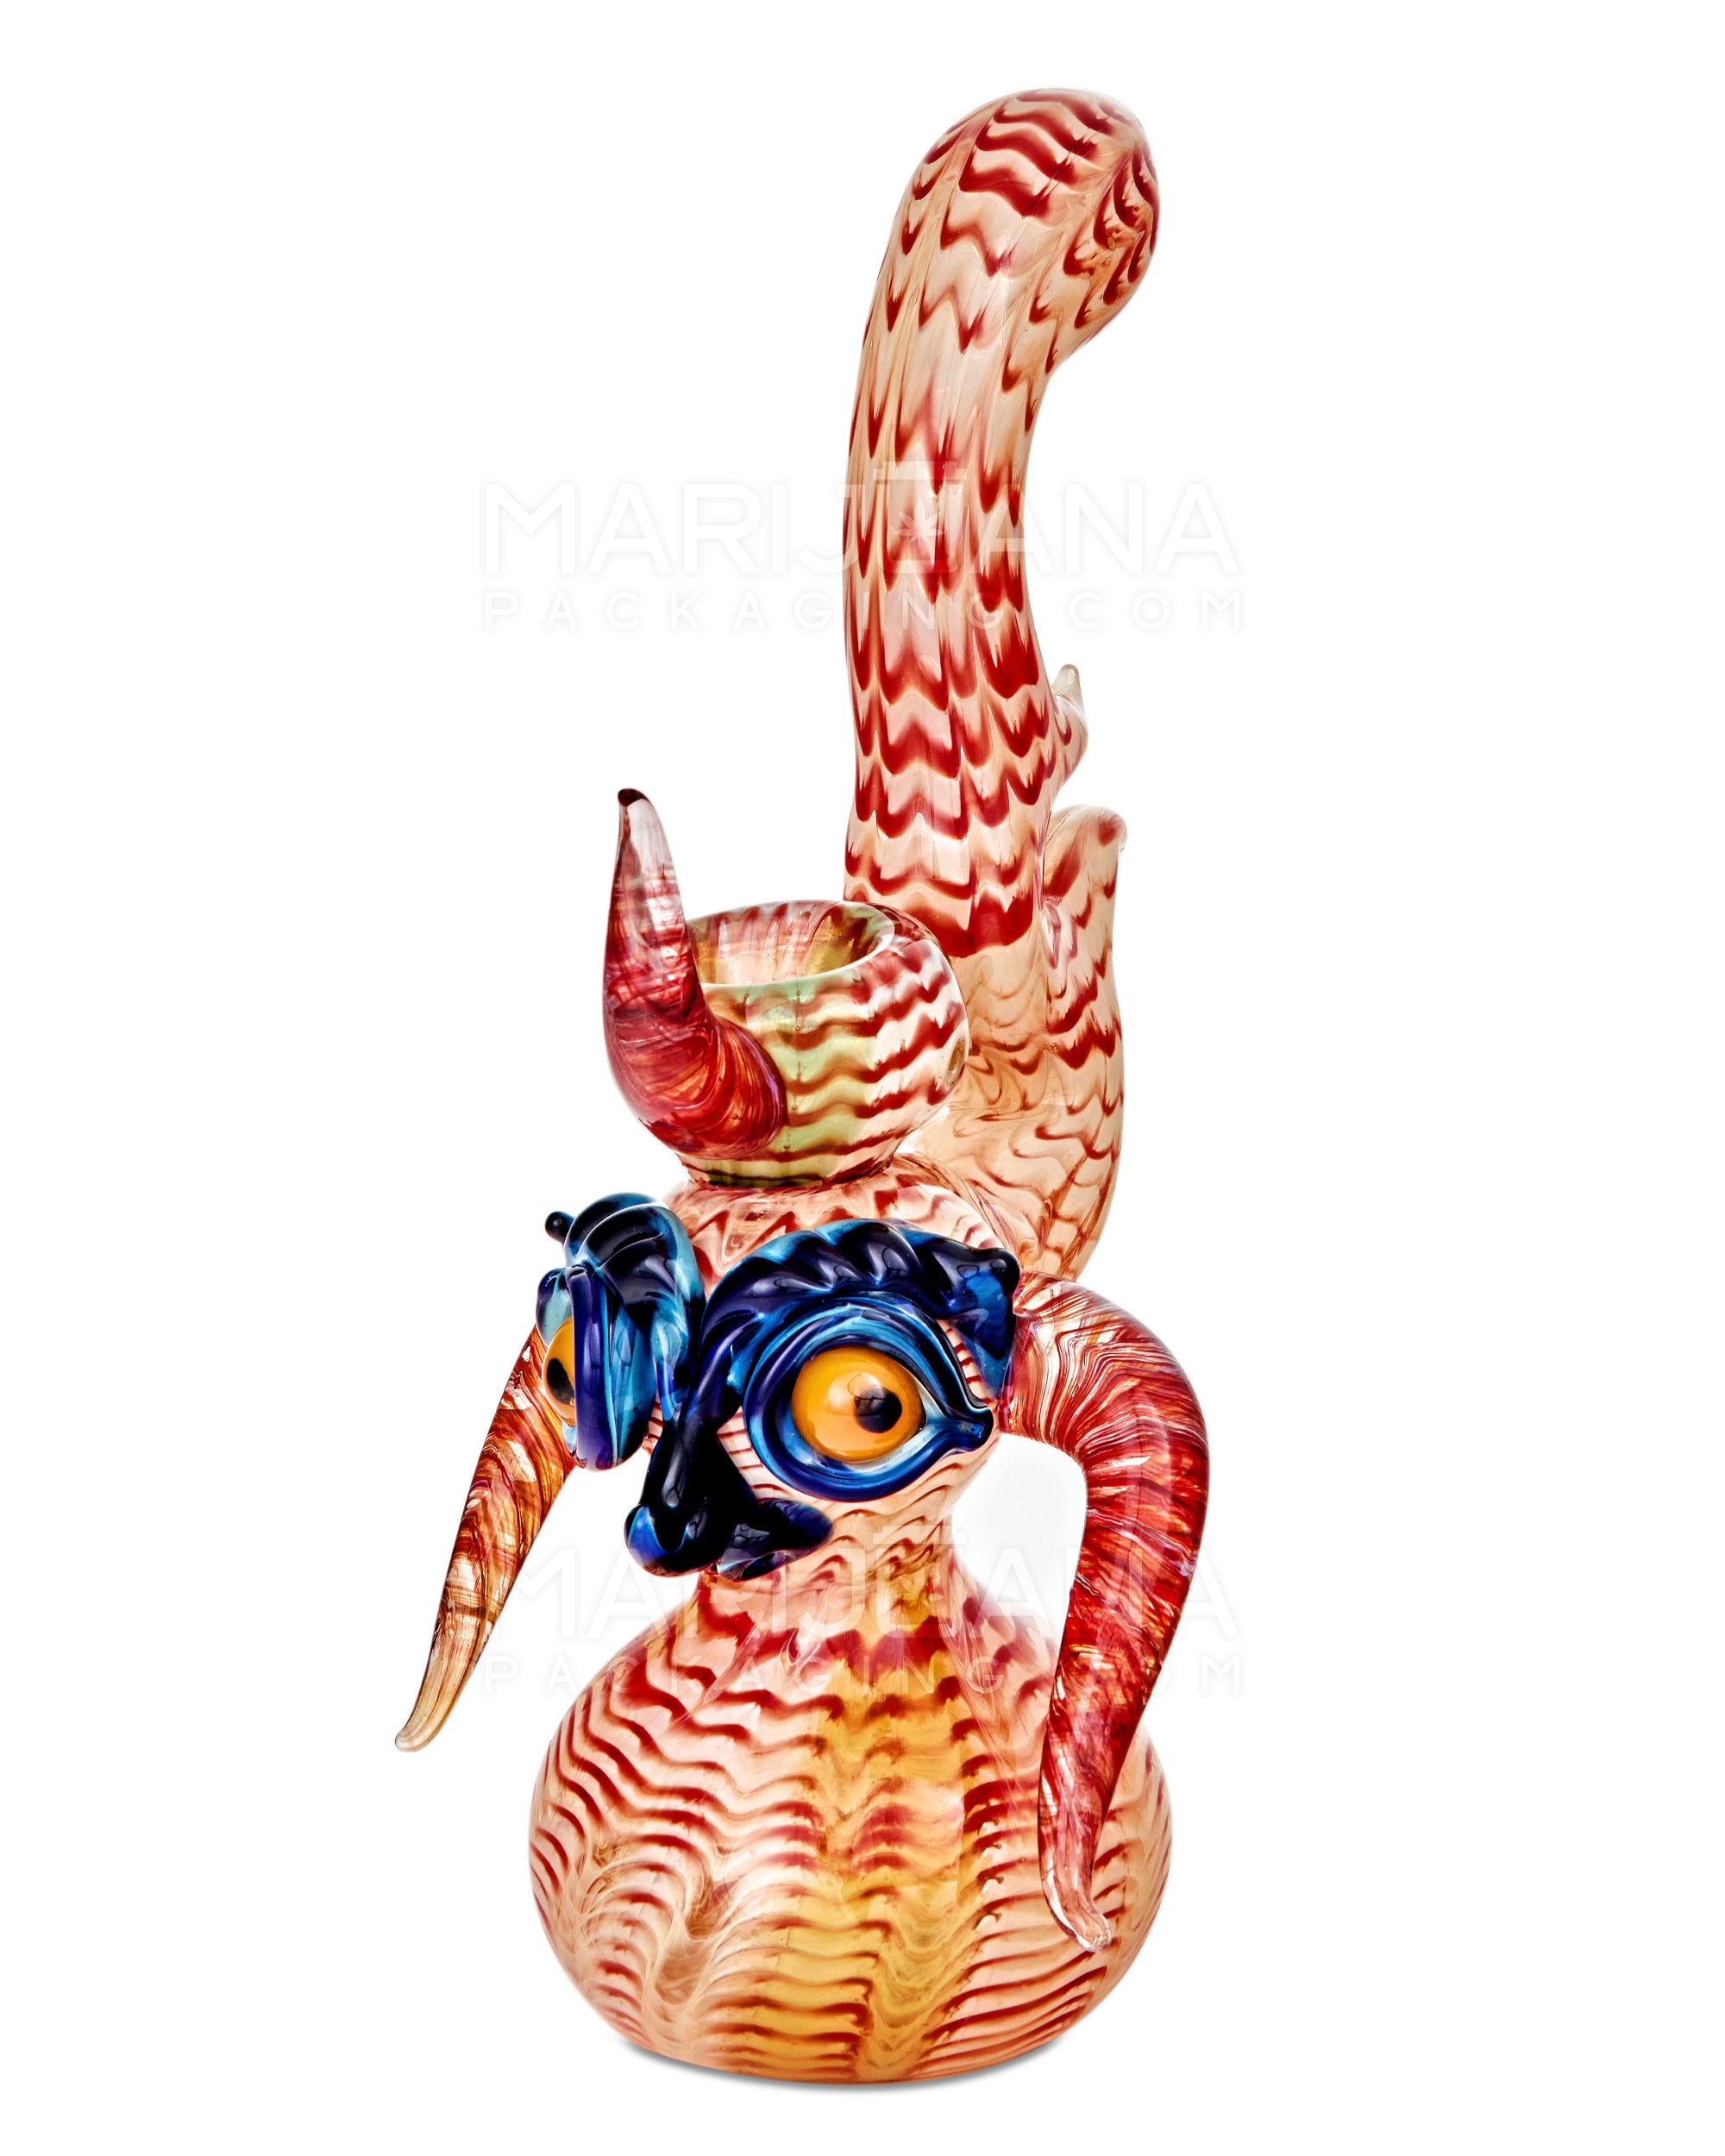 Heady | Crescent Moon Neck Raked & Gold Fumed Owl Face Bubbler w/ Triple Horns | 8.5in Tall - Thick Glass - Assorted - 6